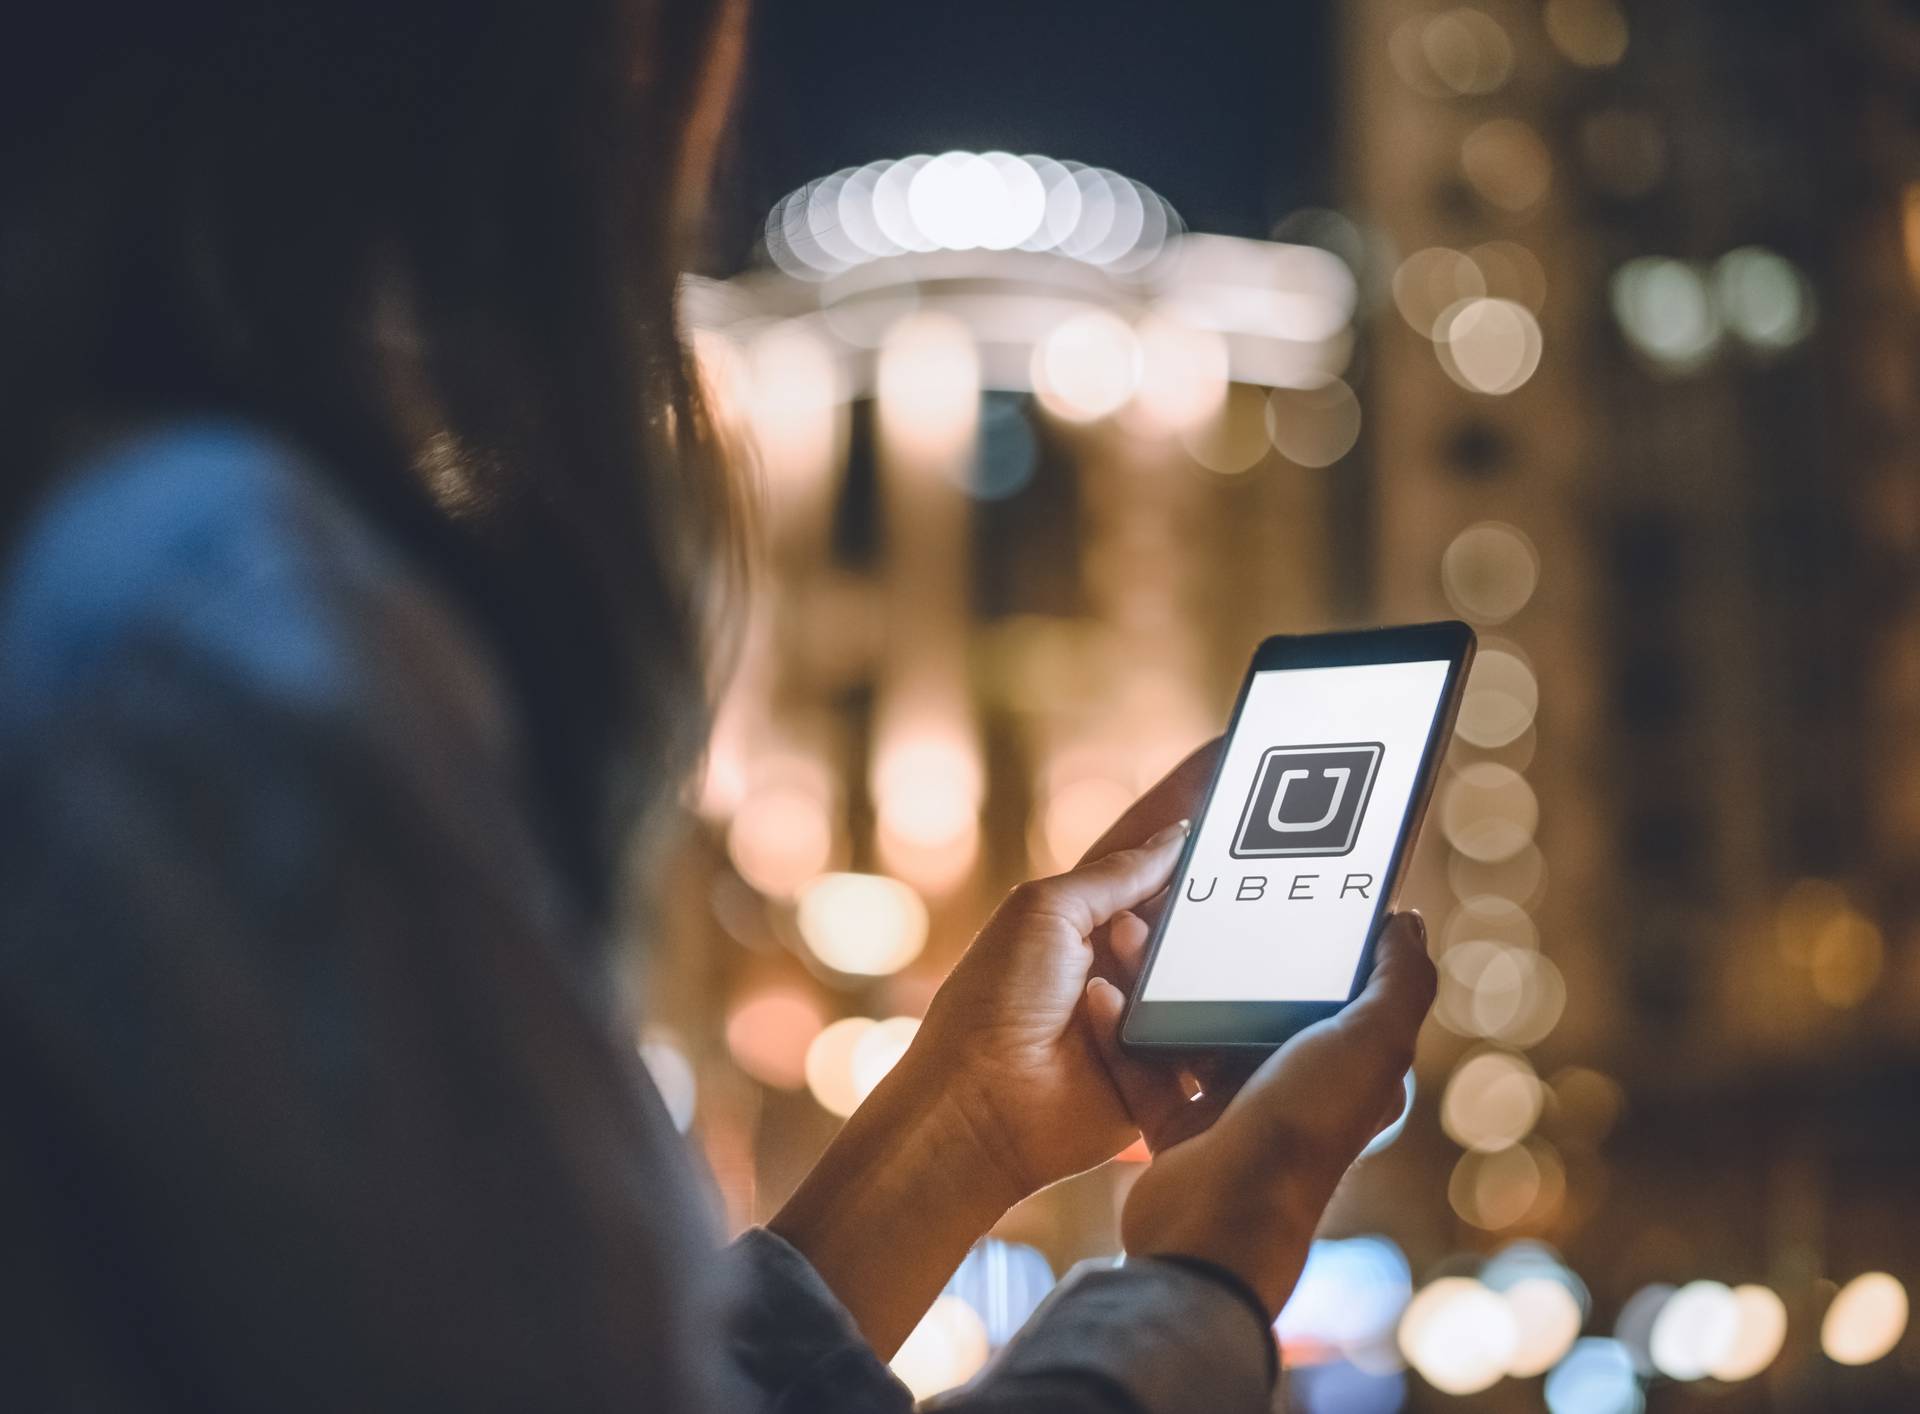 partial view of woman using smartphone with uber logo on screen and night city lights on background